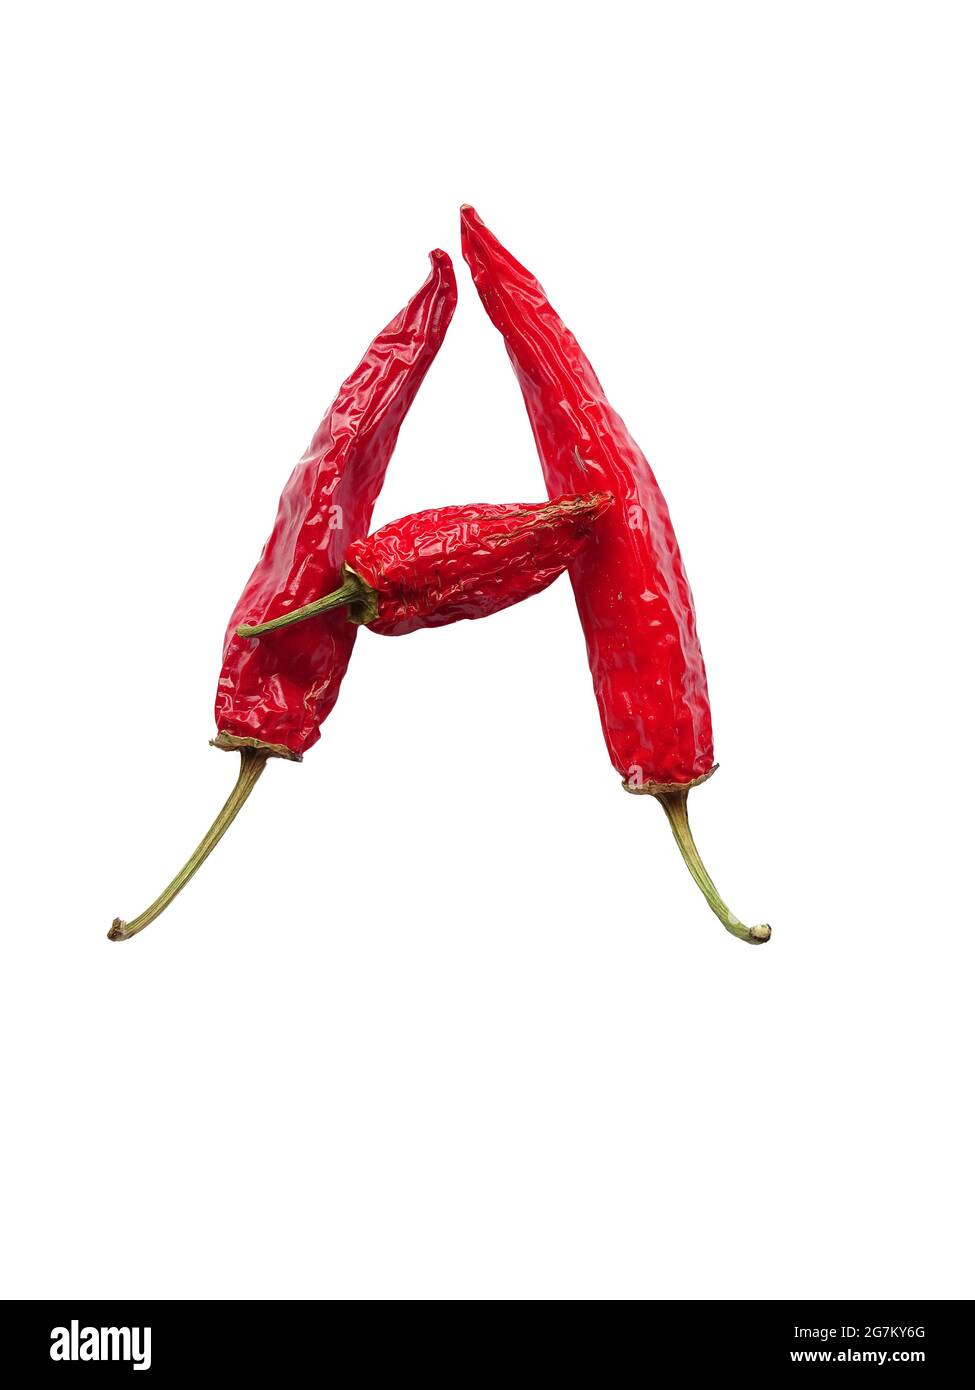 Letter A of the alphabet made with red pepper, isolated on a white background Stock Photo